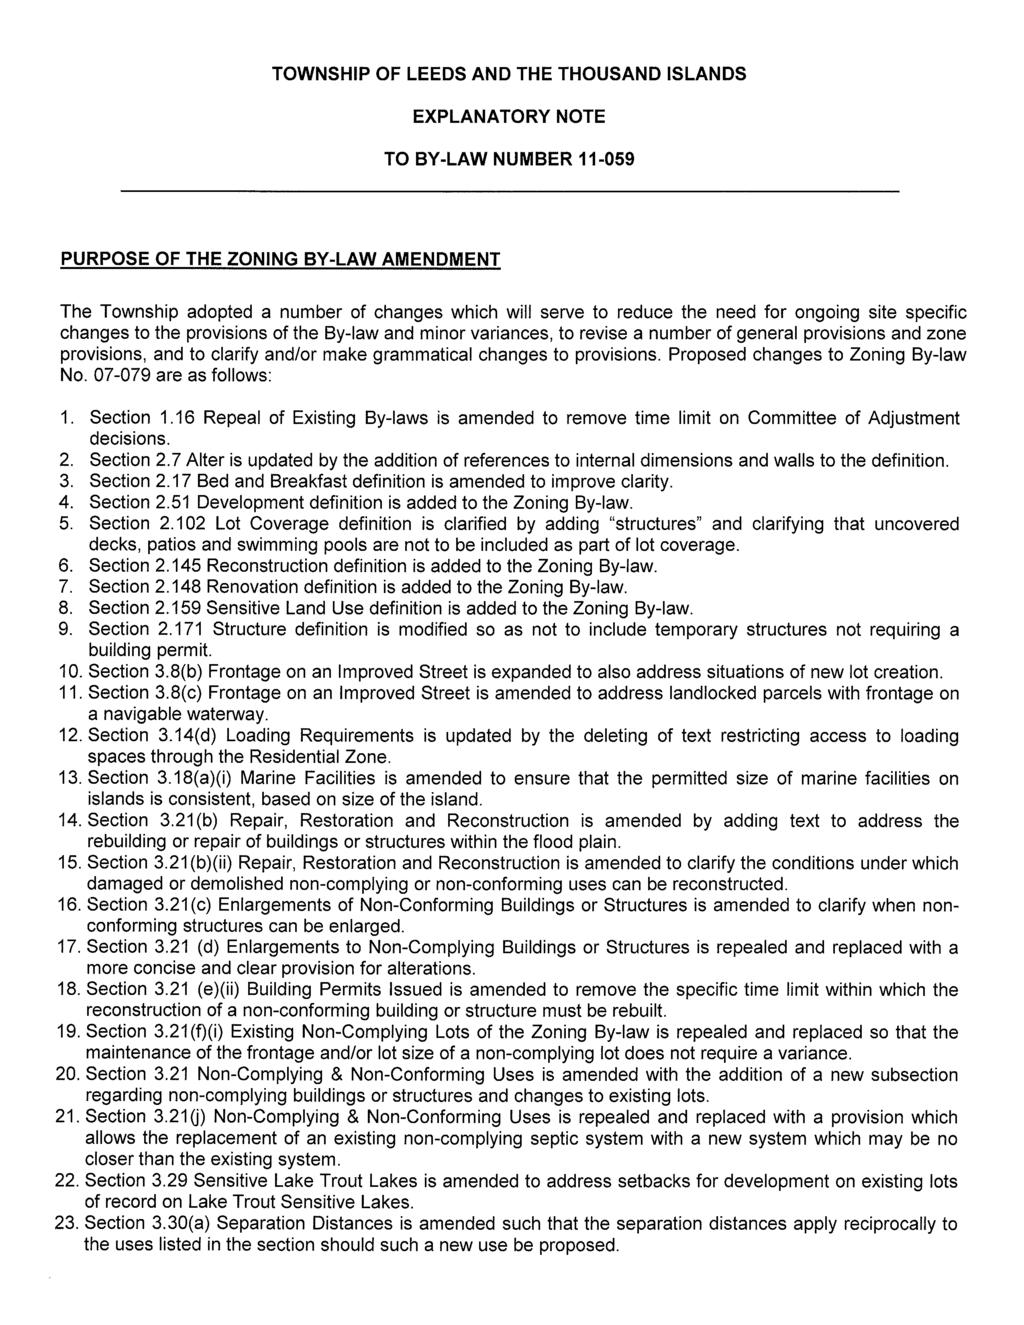 TOWNSHIP OF LEEDS AND THE THOUSAND ISLANDS EXPLANATORY NOTE TO BY-LAW NUMBER 11-059 PURPOSE OF THE ZONING BY-LAW AMENDMENT The Township adopted a number of changes which will serve to reduce the need